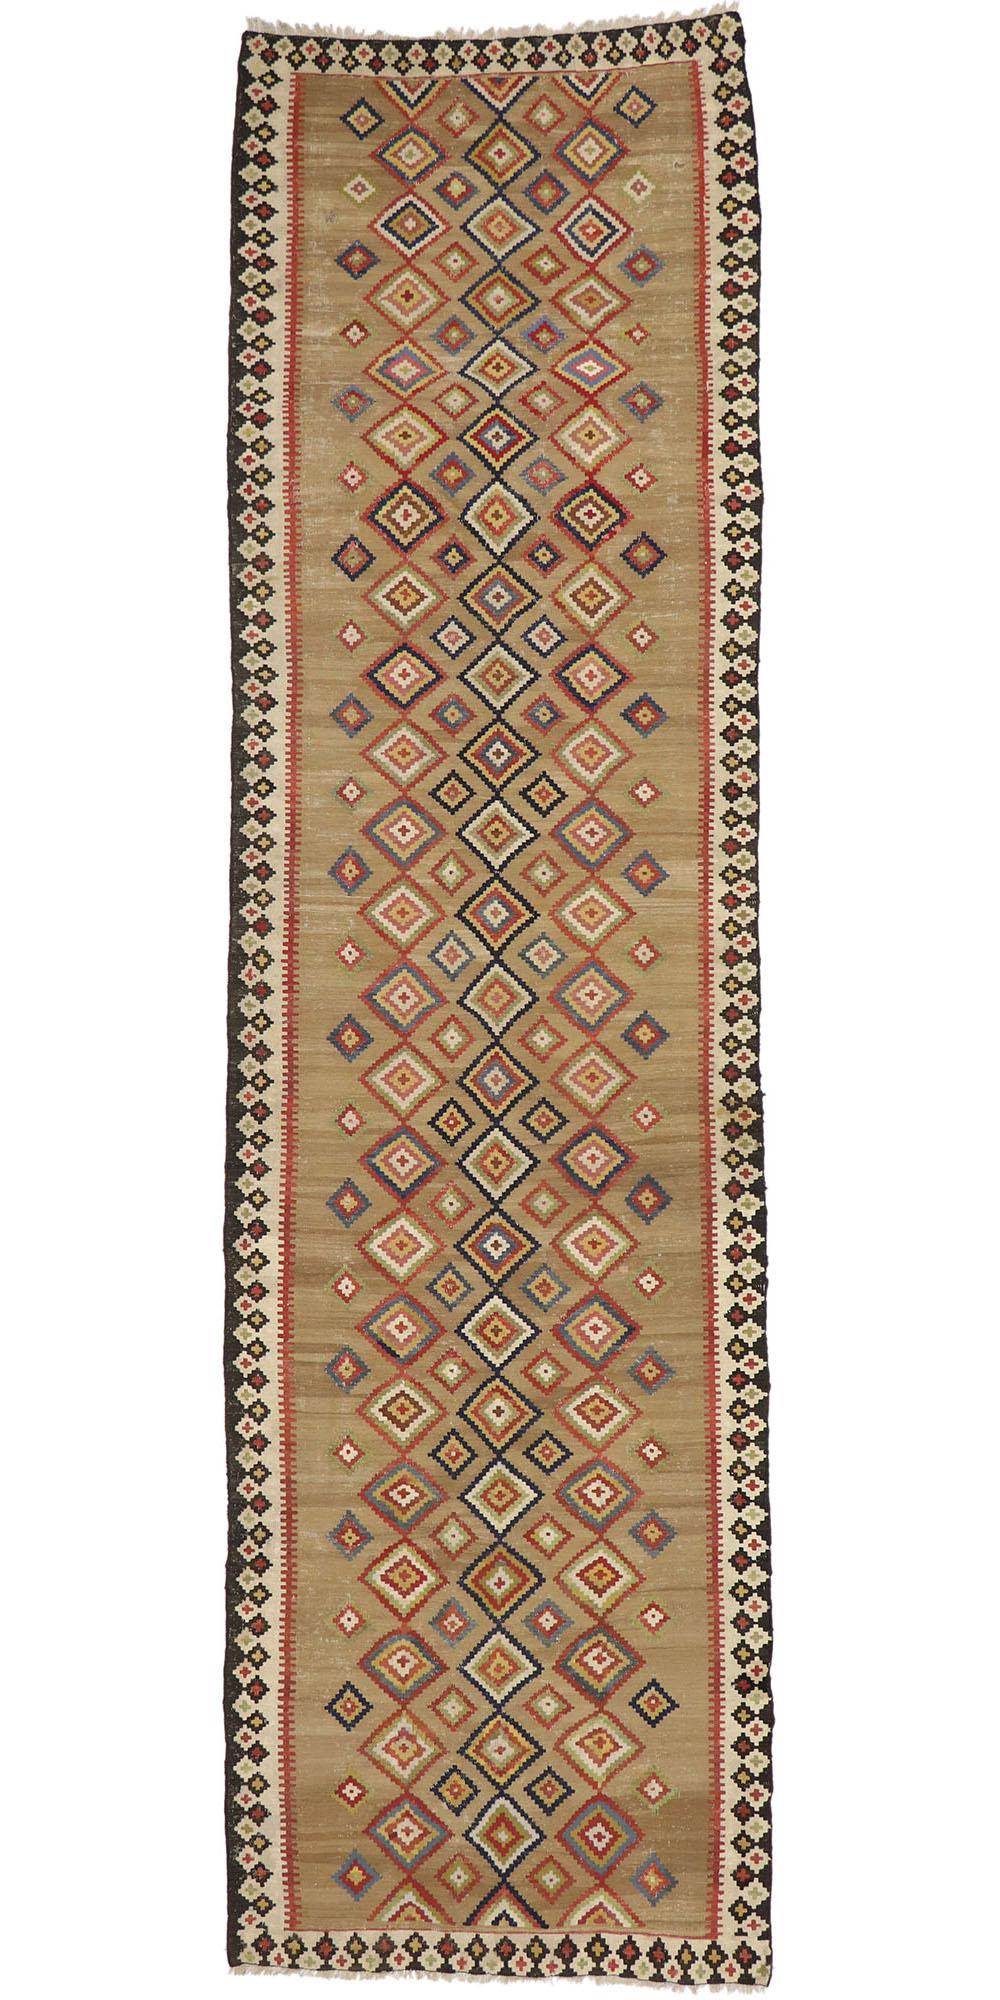 Handwoven Vintage Turkish Kilim Runner with Tribal Style For Sale 3